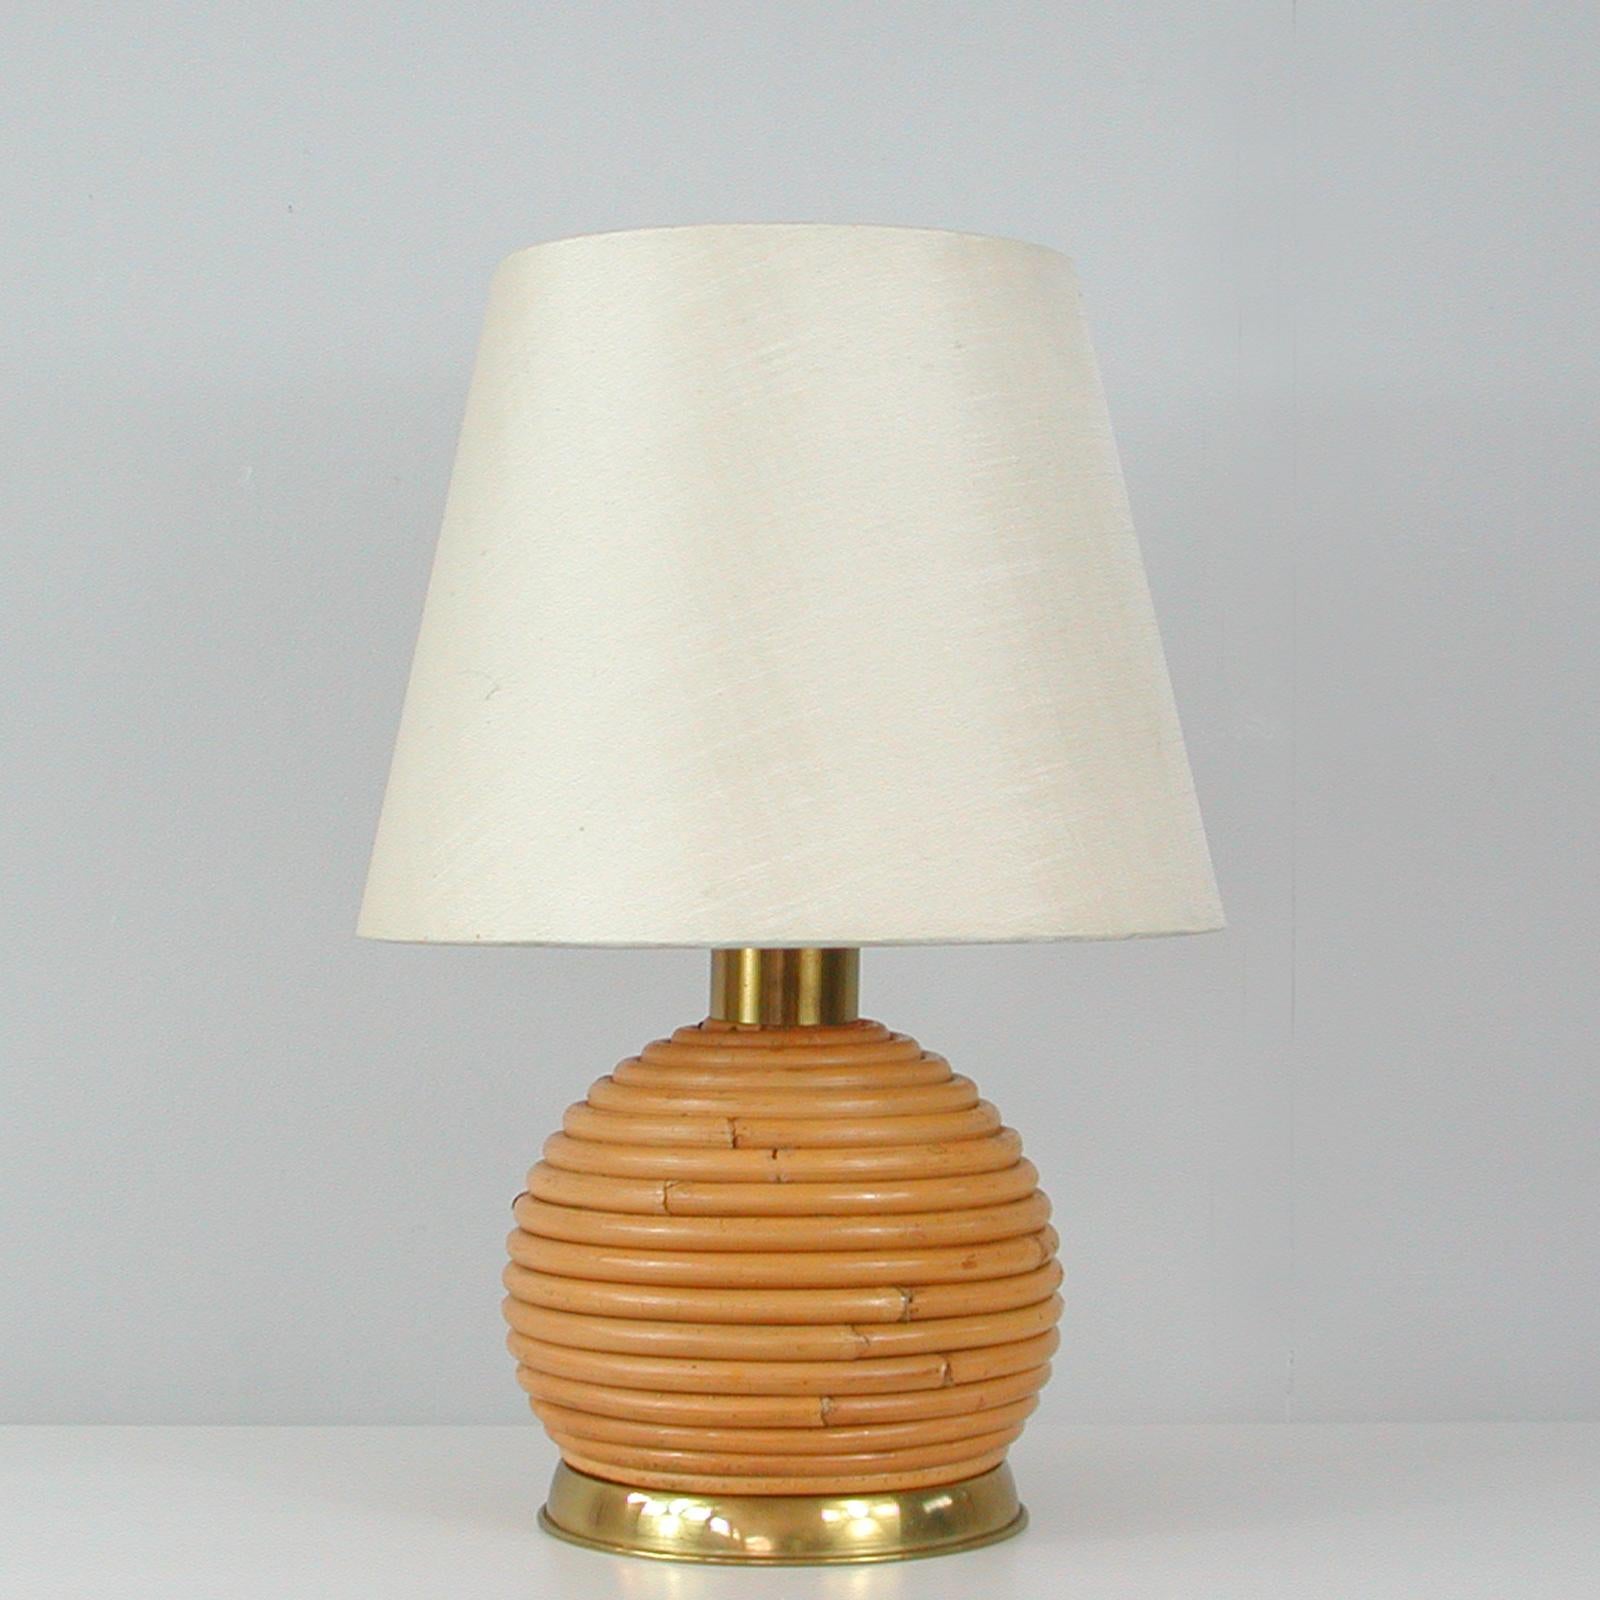 This unusual table lamp was designed and manufactured in Italy in the 1960s and it attributed to Vivai del Sud. It features a globe shaped rattan or wicker base with brass hardware. The original shade is made of cream colored silk.

Good original